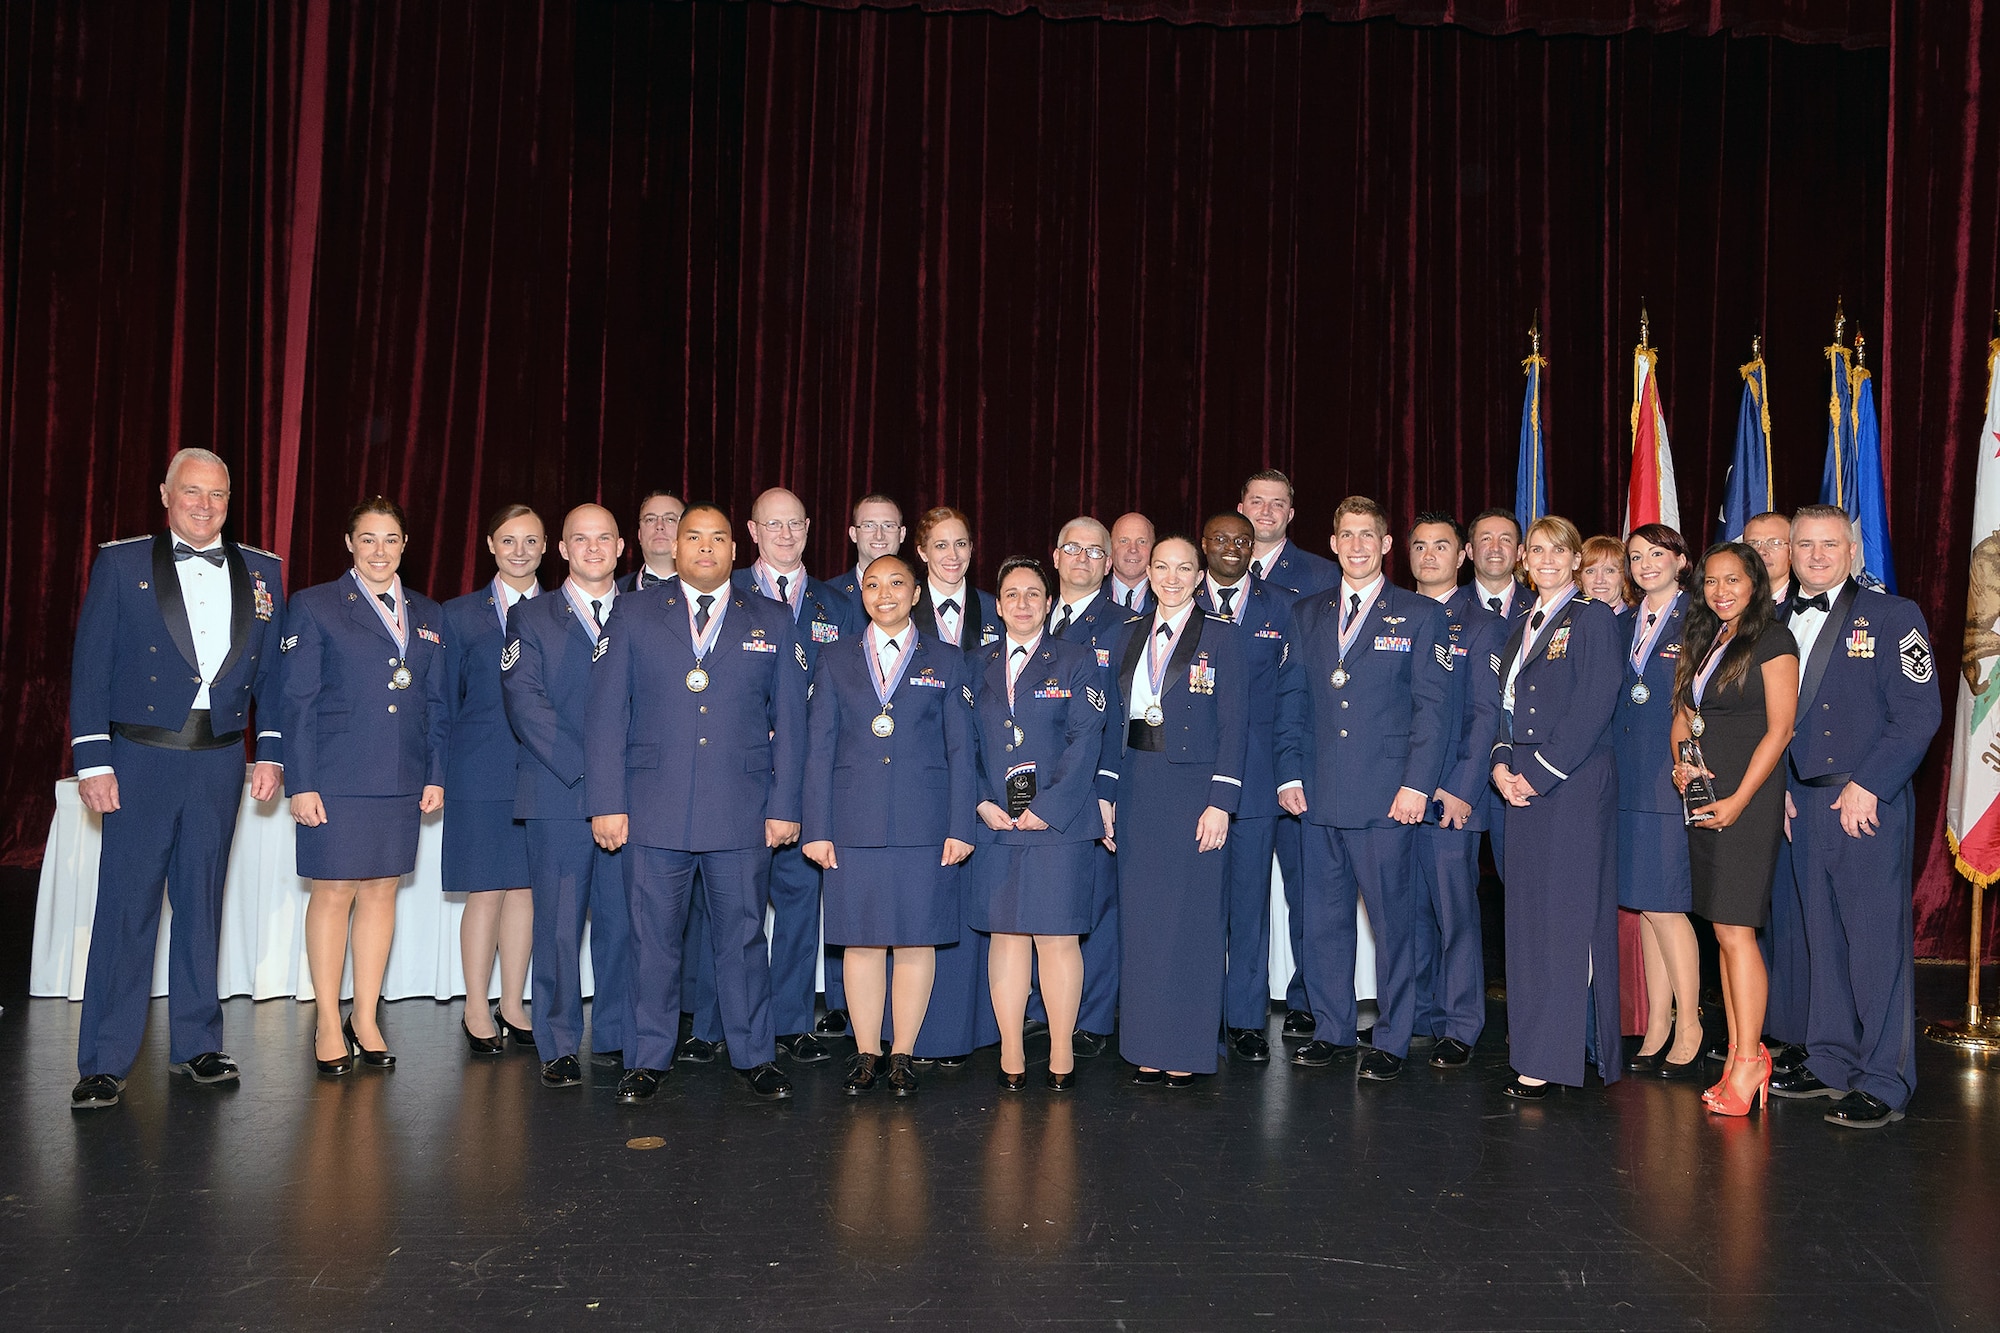 Annual Award recipients pose for a group shot at the 2015 446th Airlift Wing Annual Awards Banquet April 11 at the Landmark Convention Center, Tacoma. About 500 wing Reservists, civilians, and family members attended the event to honor the awardees recognized throughout the wing, and command-level. (Courtesy photo by David Lobban Photography, Inc.)